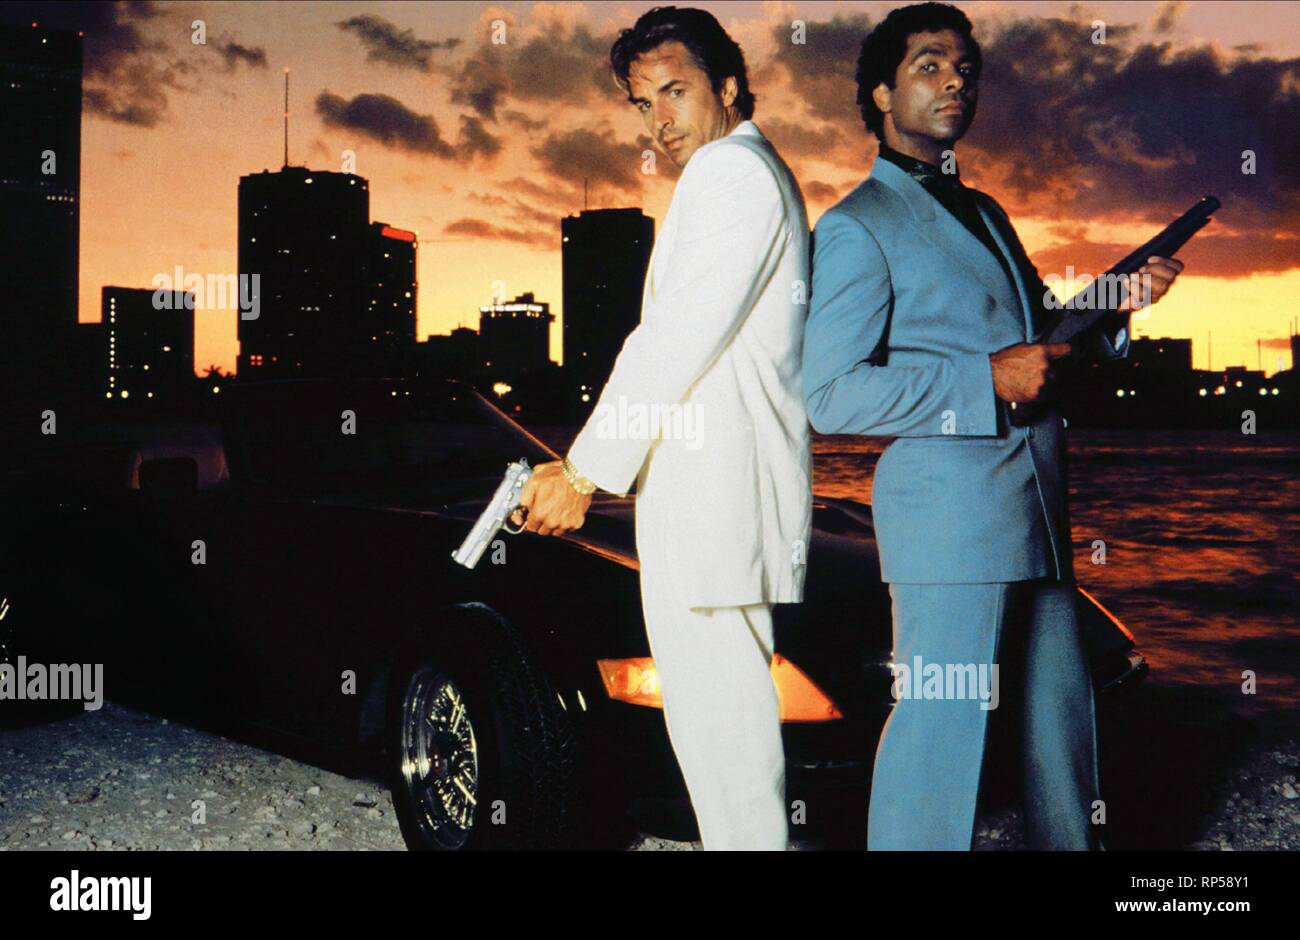 SS3570307) Television picture of Miami Vice buy celebrity photos